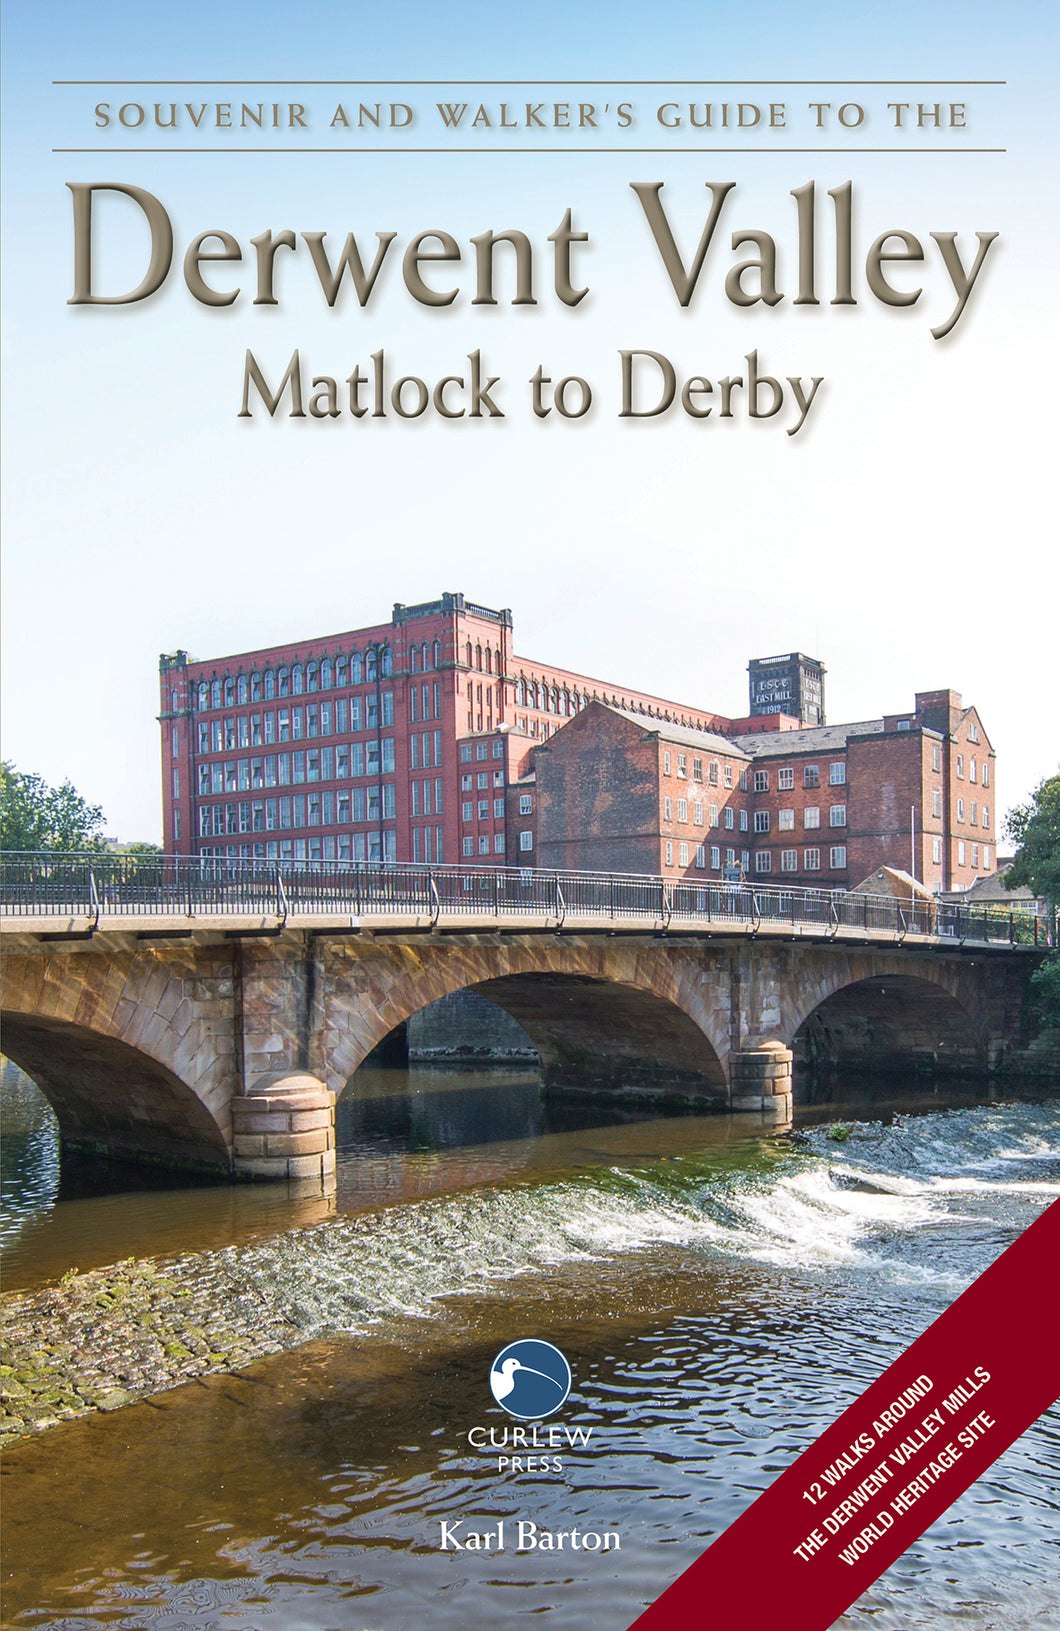 Souvenir and walker’s guide to the Derwent Valley: Matlock to Derby